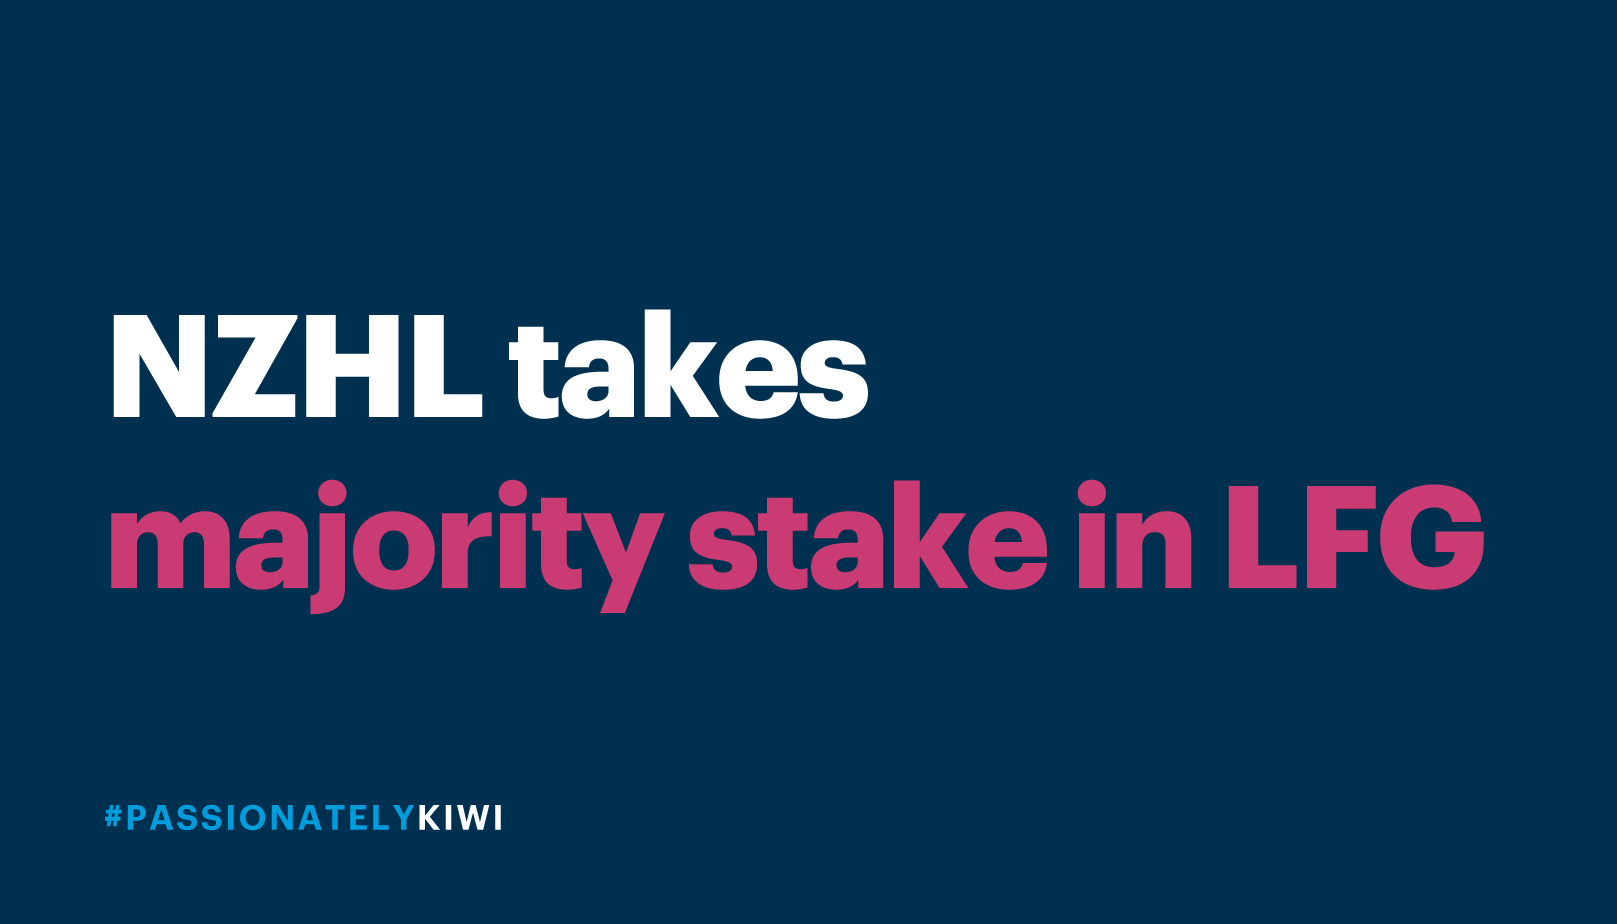 NZHL eyes growth with majority stake in Link Financial Group Thumbnail